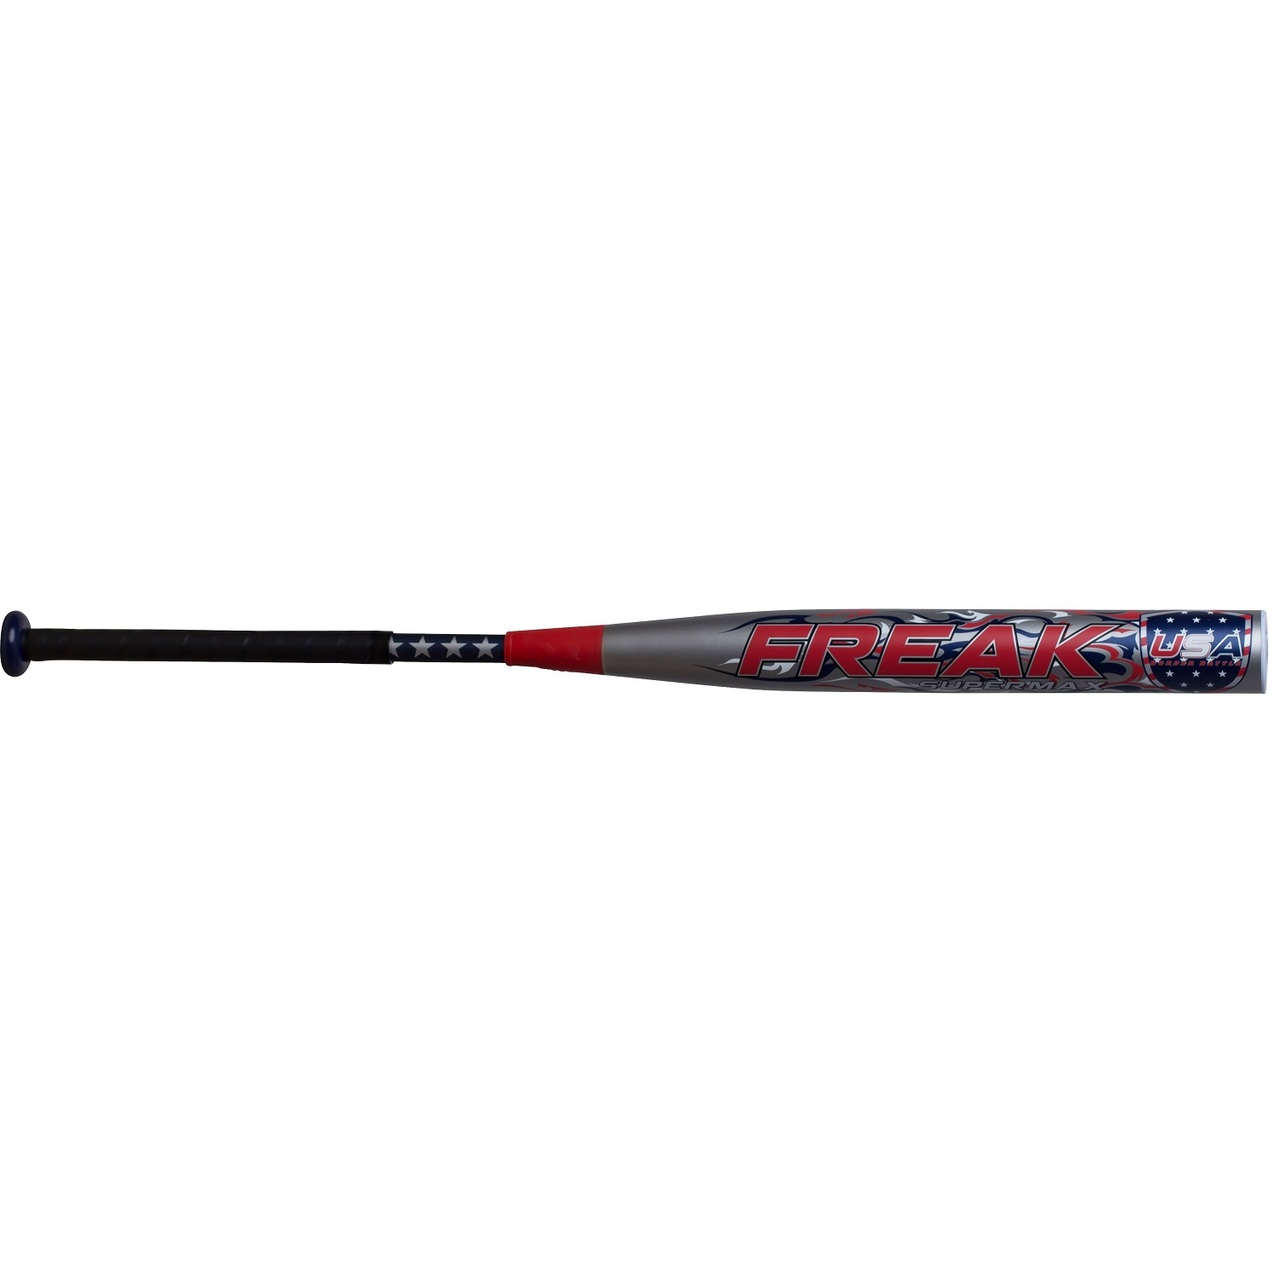 Numbered Limited Edition - Only 1000 made Four-Piece, 100% Composite Construction 1 Ounce Supermax Weighting Approved for Play in ASA 1 Year Manufacturer's Warranty The all new 2018 Miken Freak USA Border Battle Edition bat continues the groundbreaking four-piece ASA bat movement, delivering a massive 14 inch double-barrel bat that crushes .52 COR ASA balls. Combined with Supermax weighting, the Freak Border Battle Edition will send balls over the fence in a hurry. Comes with a 1 year manufacturer's warranty from Miken. - Numbered Limited Edition - Only 1000 made - 2 1/4 Inch Barrel Diameter - Four-Piece, 100% Composite Construction - 1 Ounce Supermax Weighting - 14 Inch Barrel Length - Tetra-Core Technology - Sensi-Flex Handle Technology - 100 COMP Technology - 1 Year Manufacturer's Warranty - Approved for Play in ASA - Made In The USA